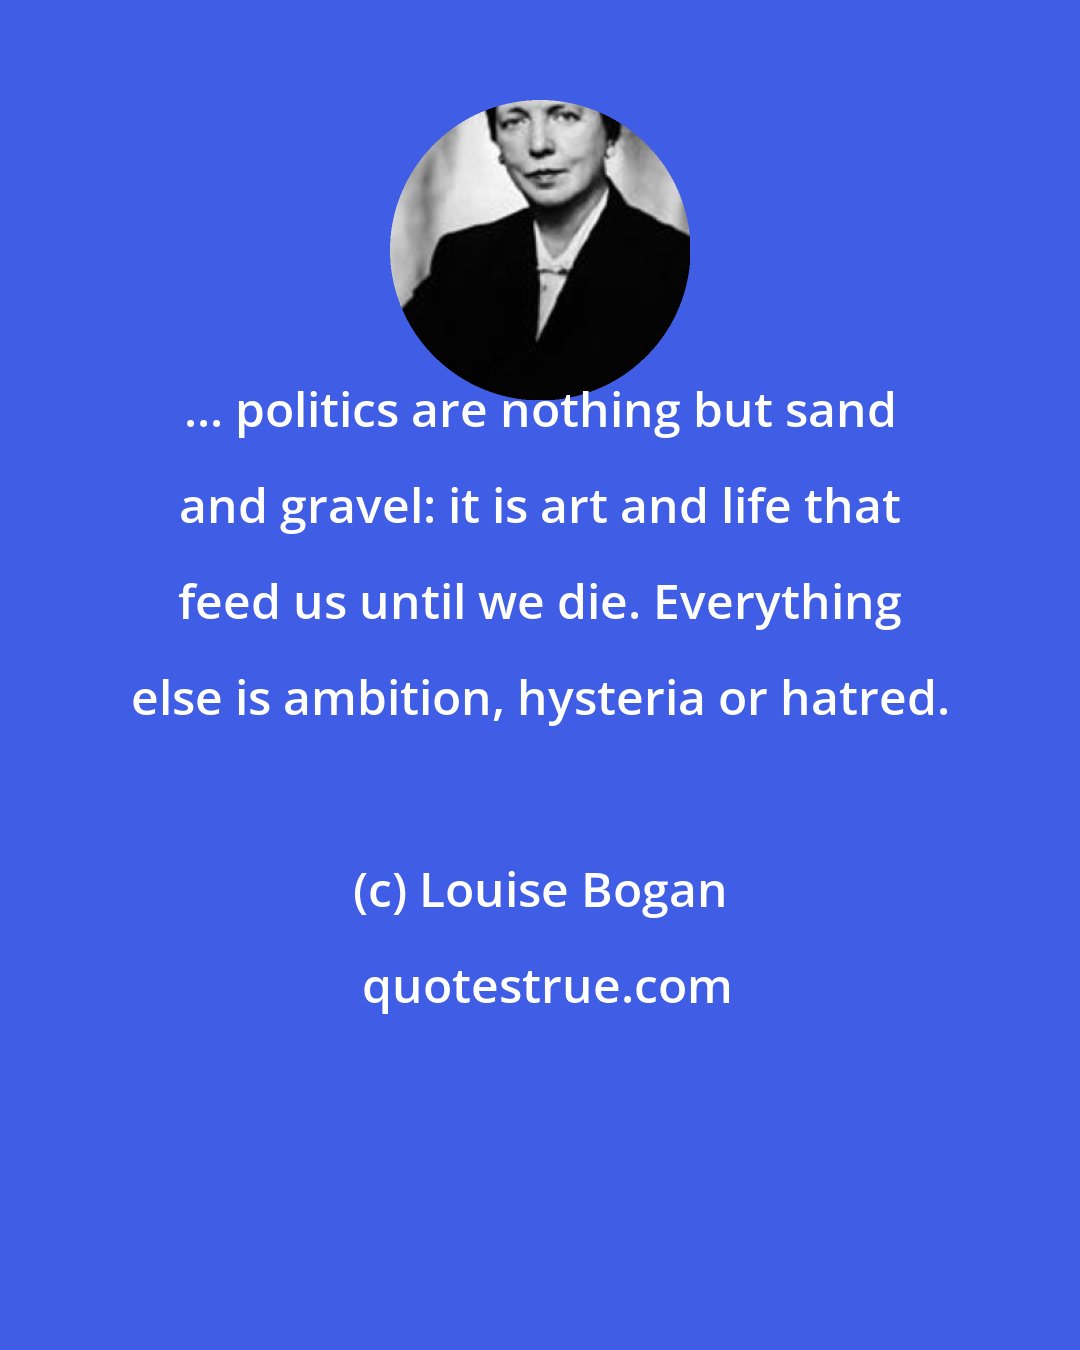 Louise Bogan: ... politics are nothing but sand and gravel: it is art and life that feed us until we die. Everything else is ambition, hysteria or hatred.